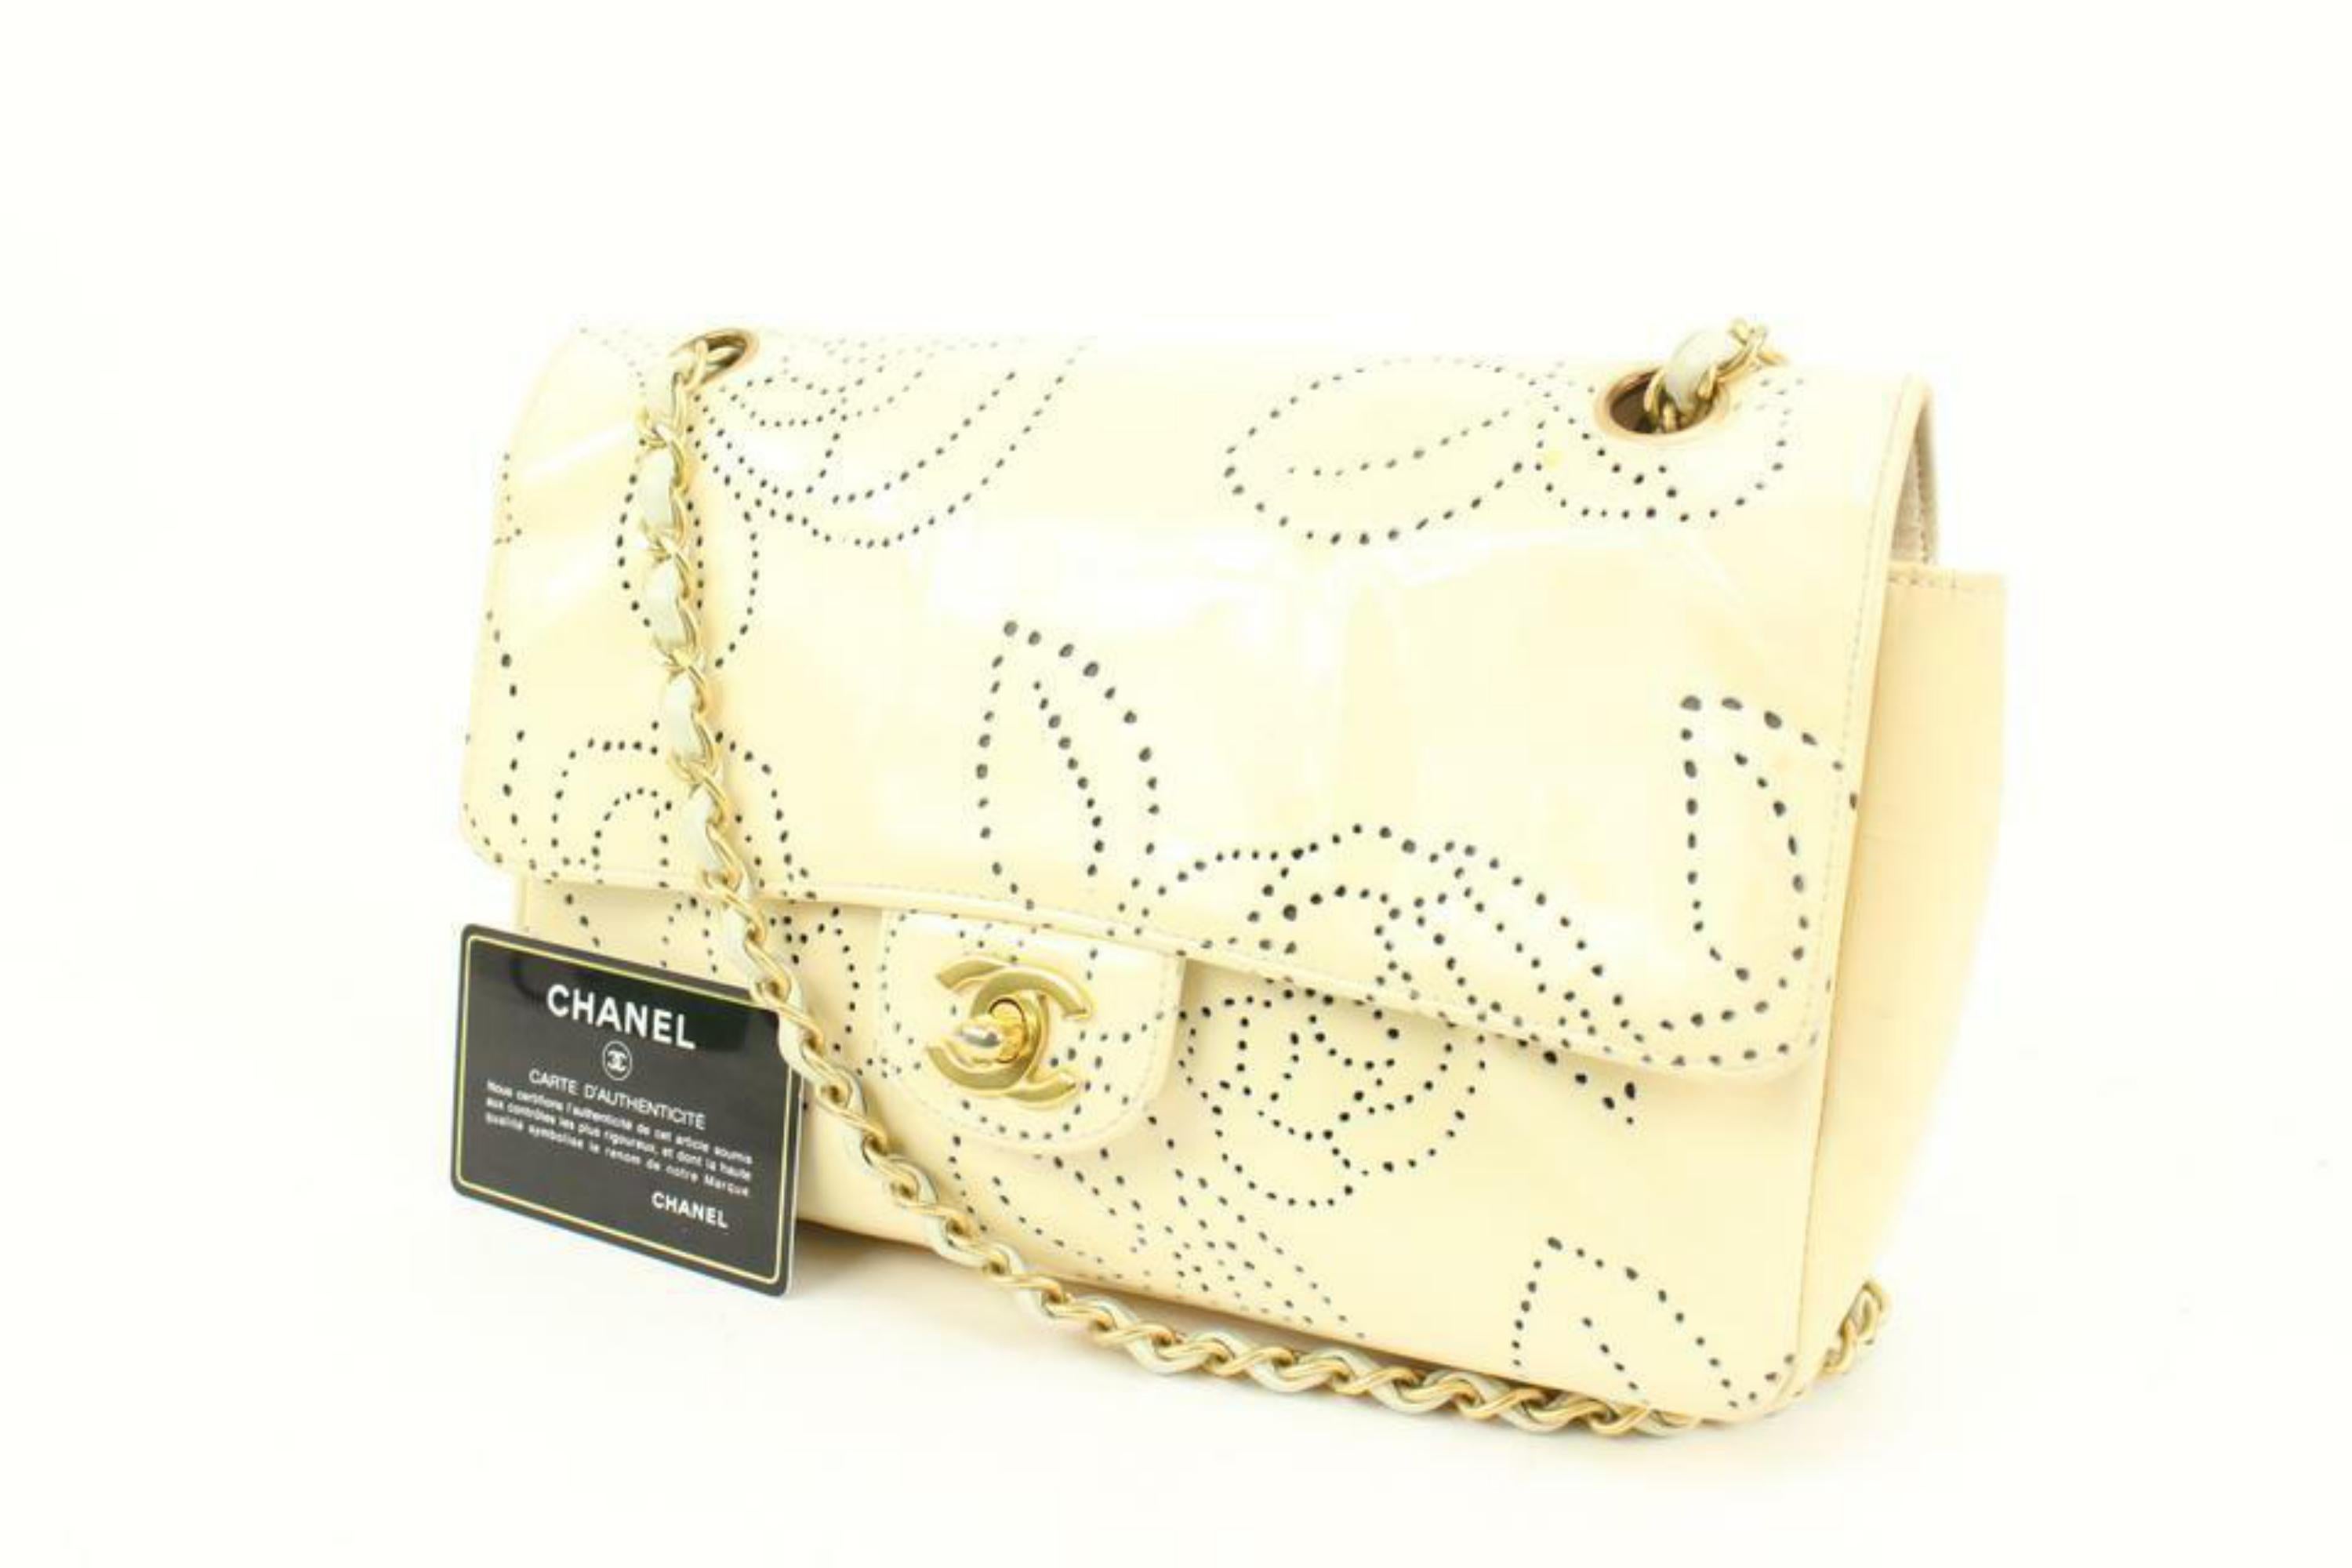 Chanel 2003 Cream Camelia Perforated Patent Medium Classic Flap GHW 2ck119
Date Code/Serial Number: 8268270
Made In: France
Measurements: Length:  9.5